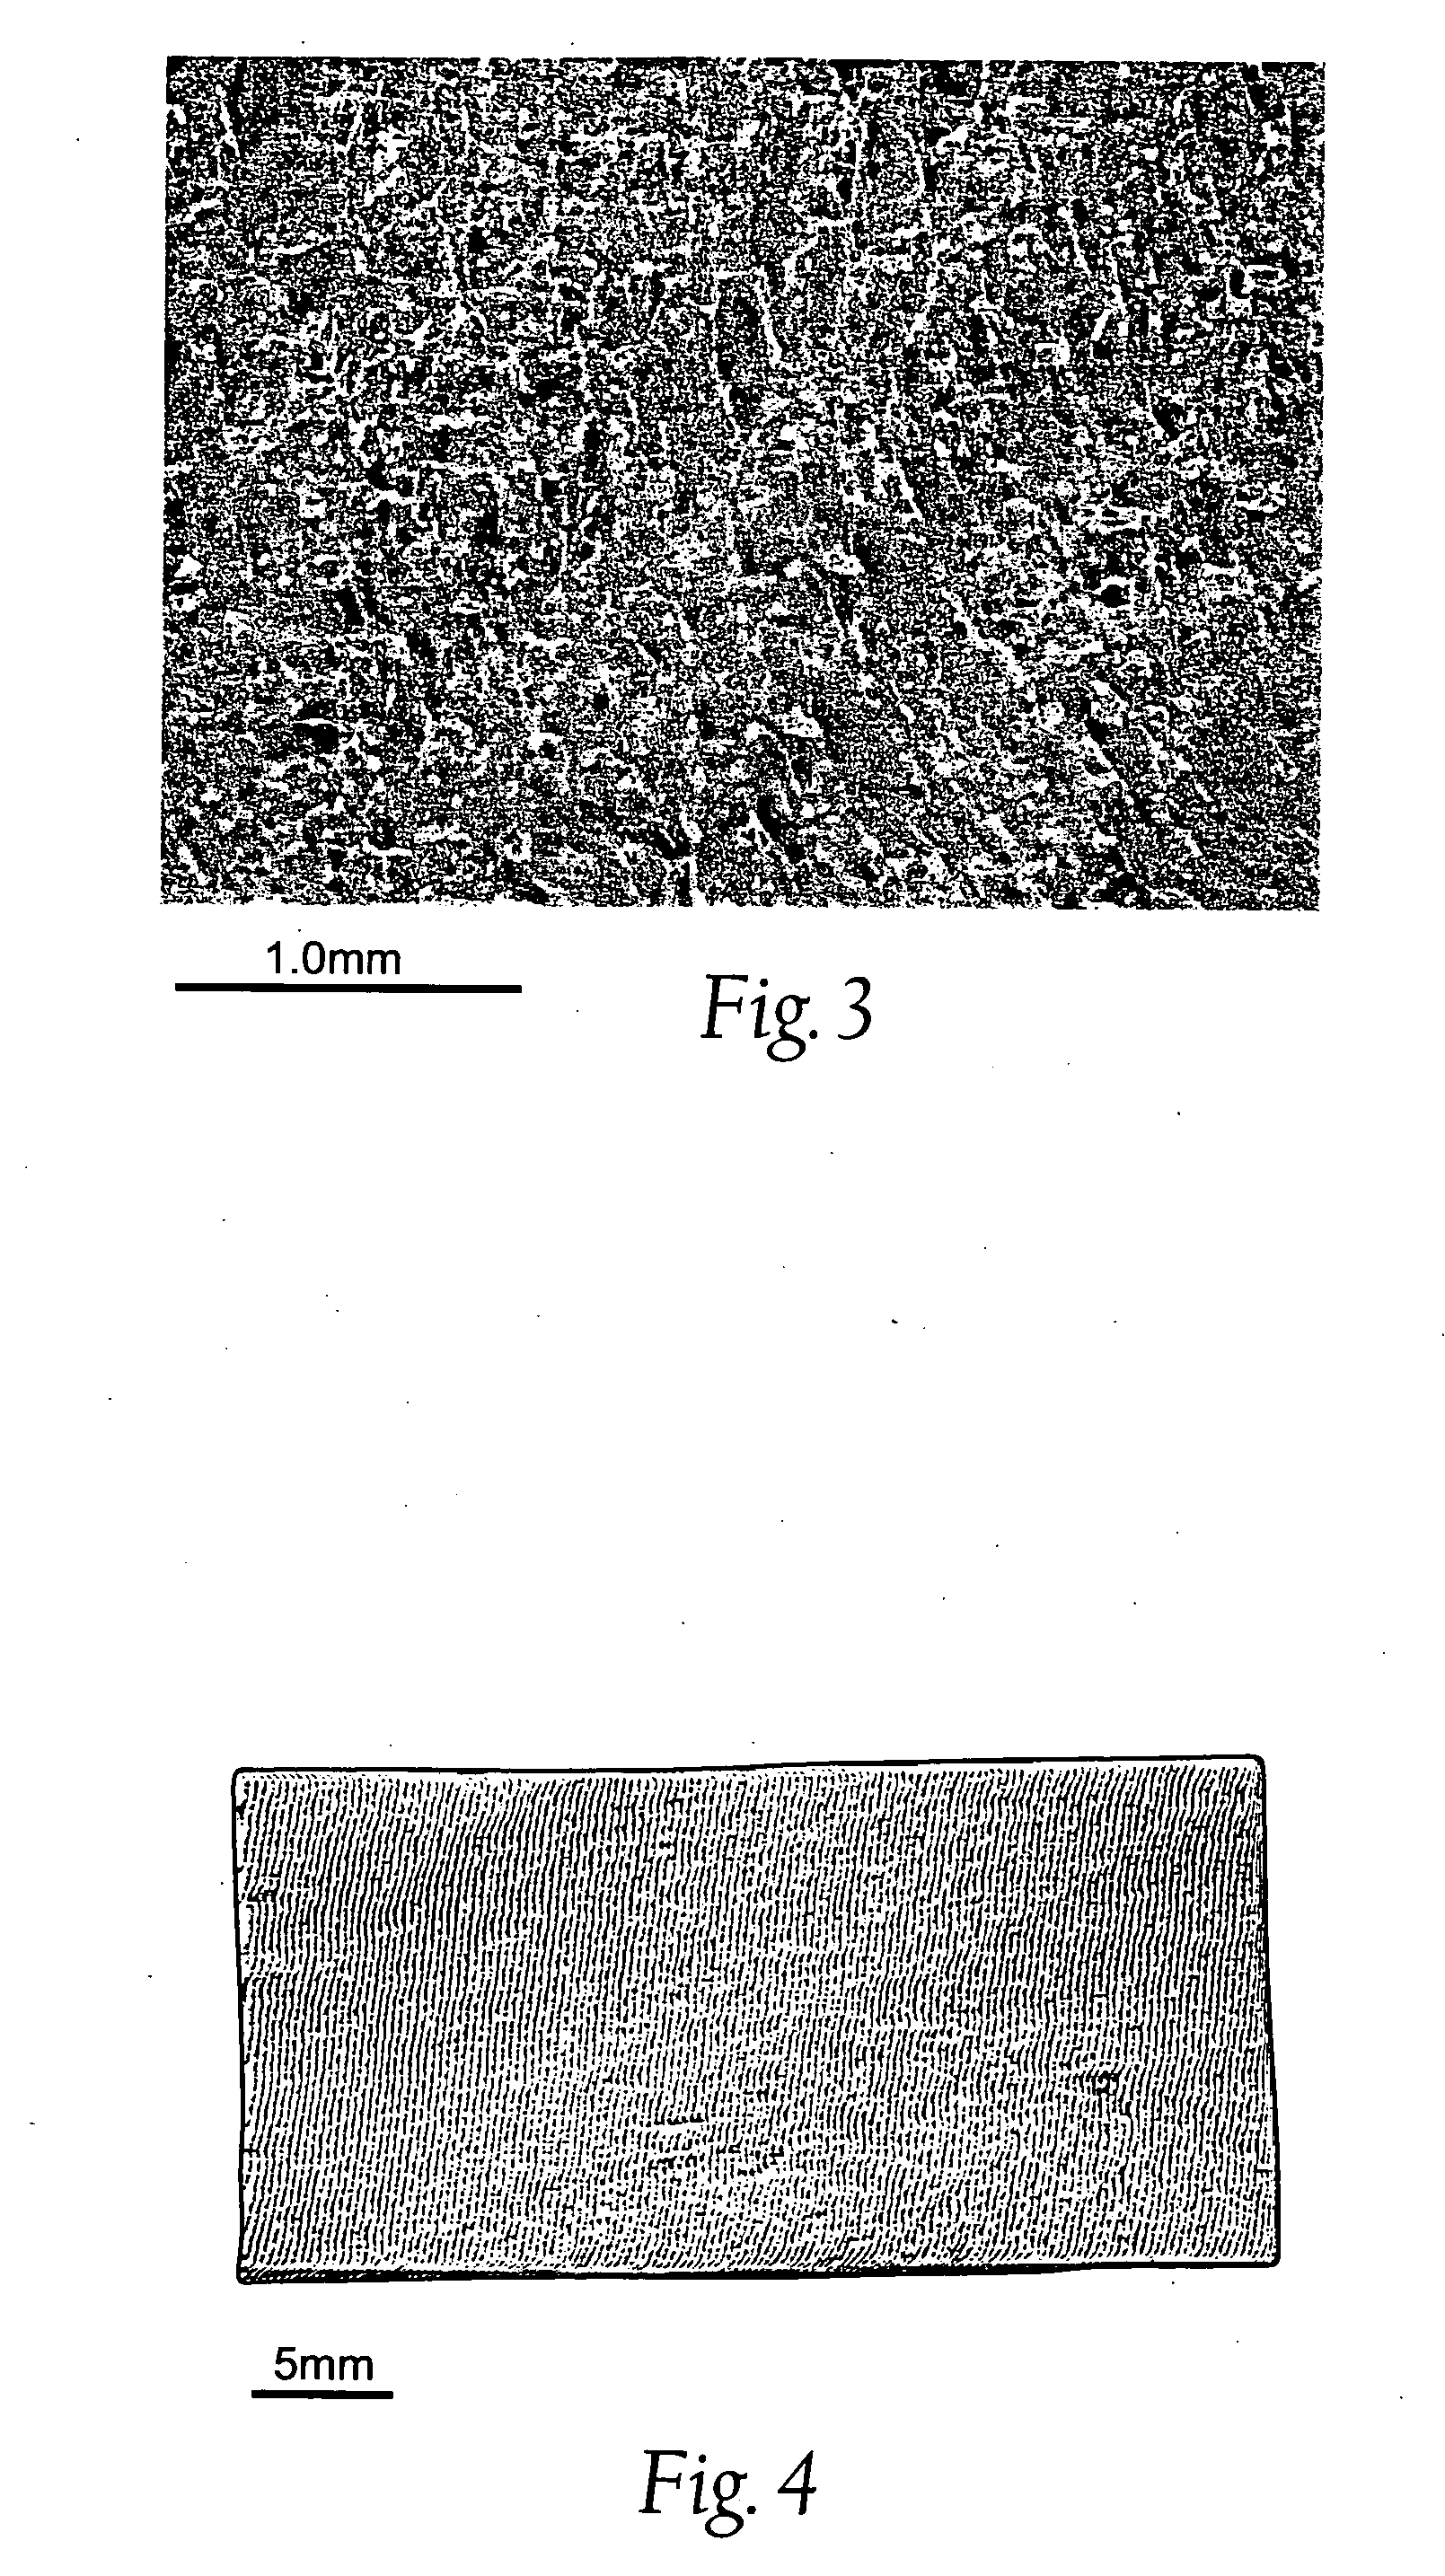 Method for preparing a compressed wound dressing